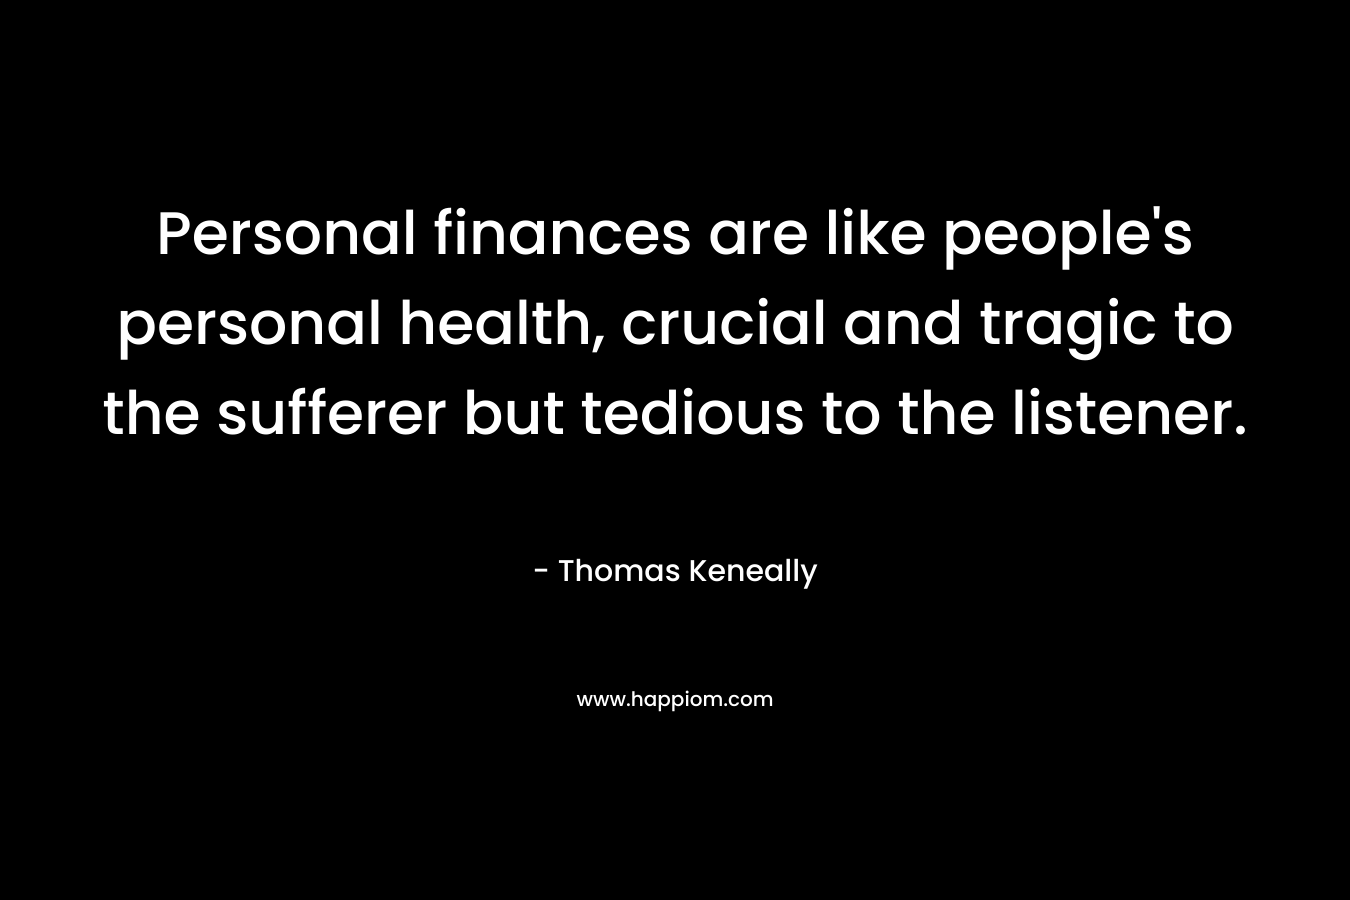 Personal finances are like people's personal health, crucial and tragic to the sufferer but tedious to the listener. 